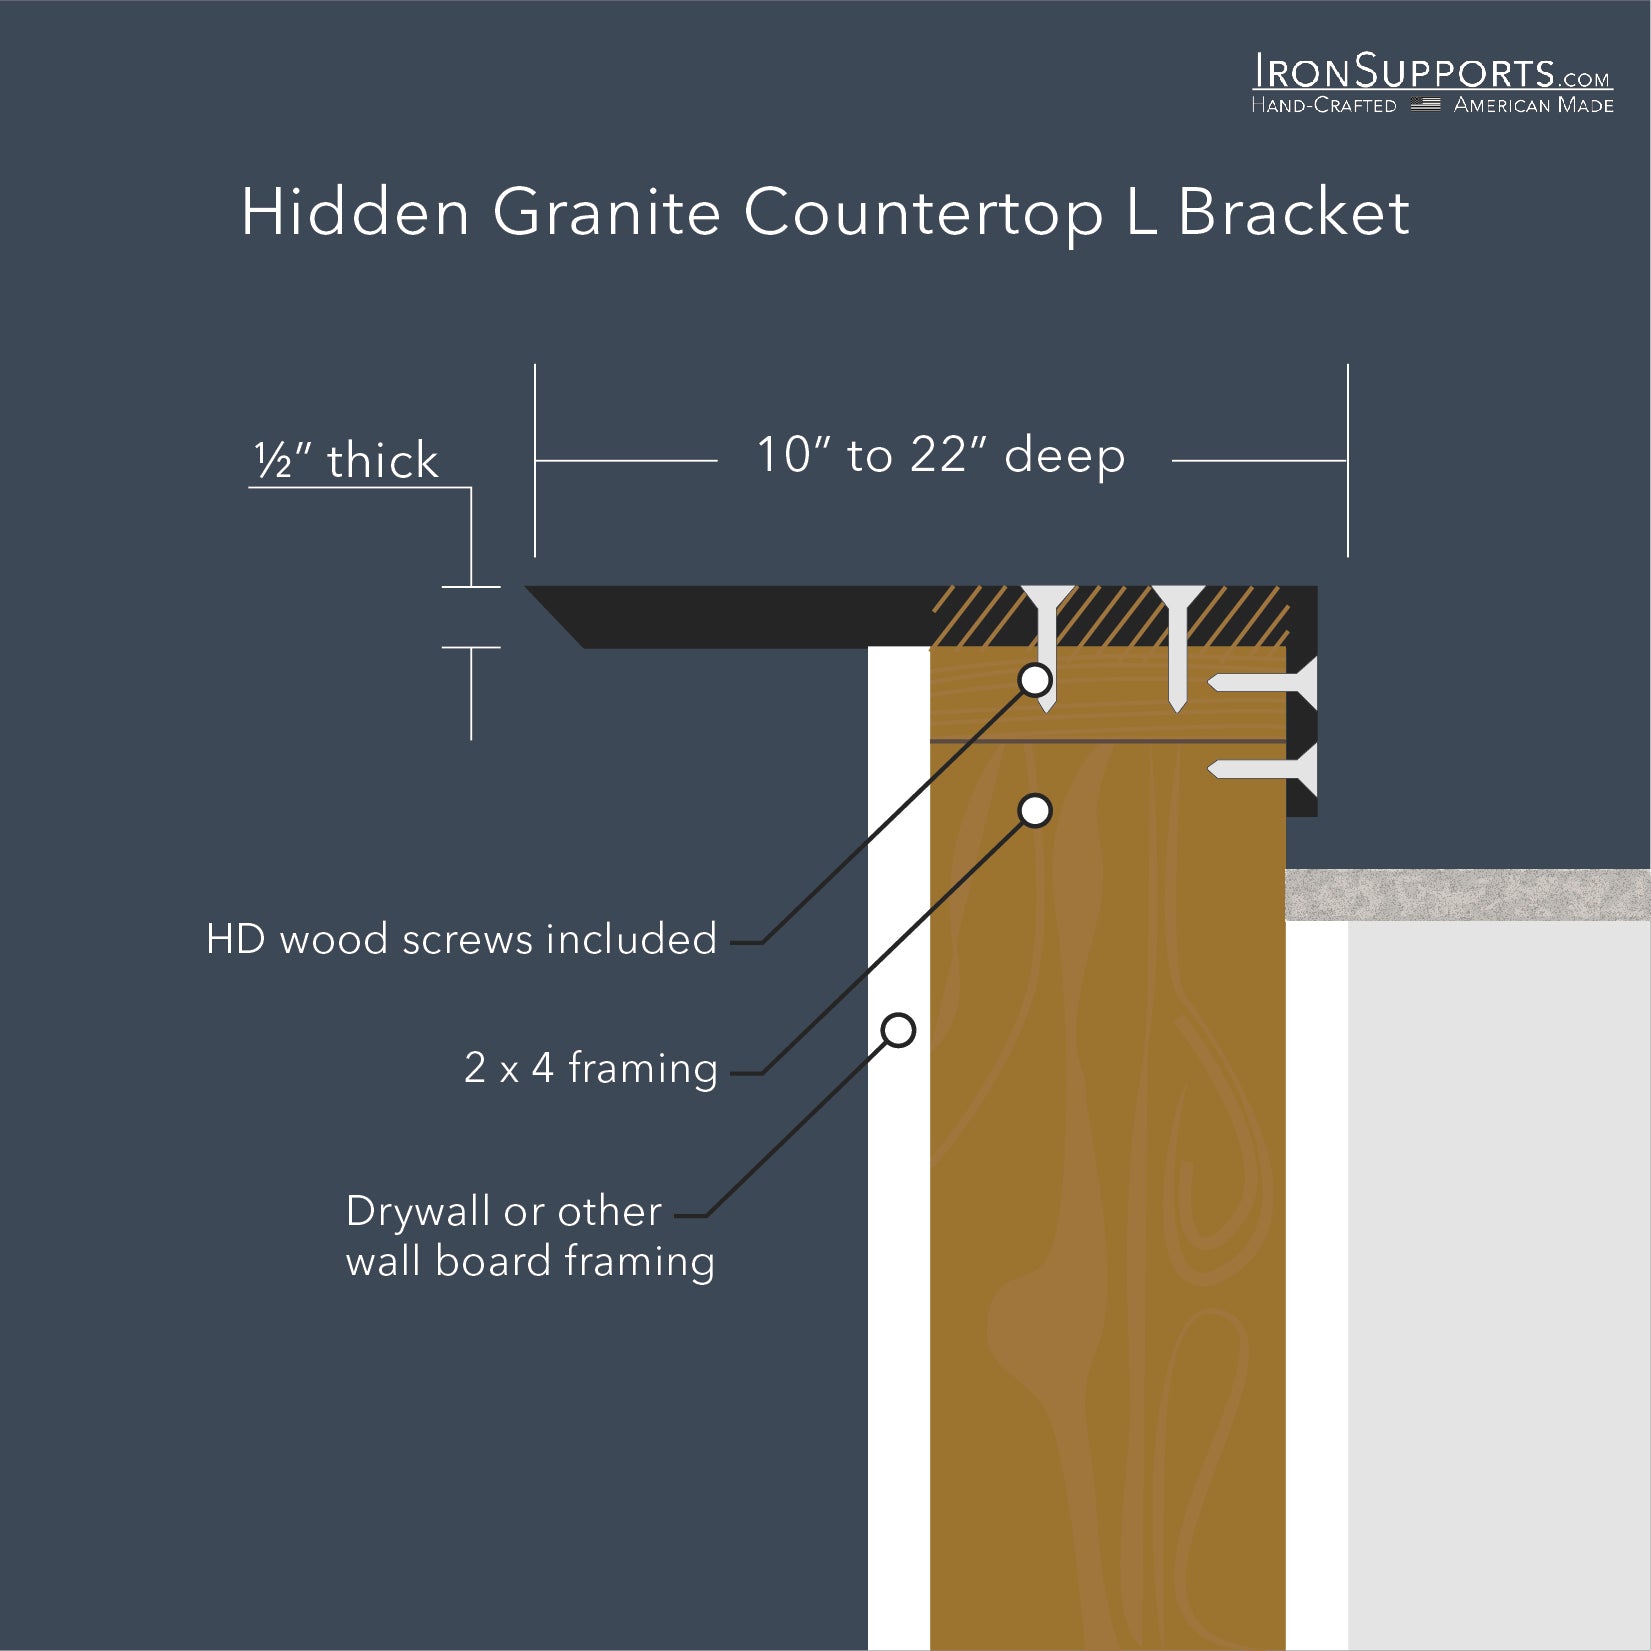 Illustration of Hidden Granite Countertop L Bracket installation. Offers sturdy support for kitchen islands and pony walls.